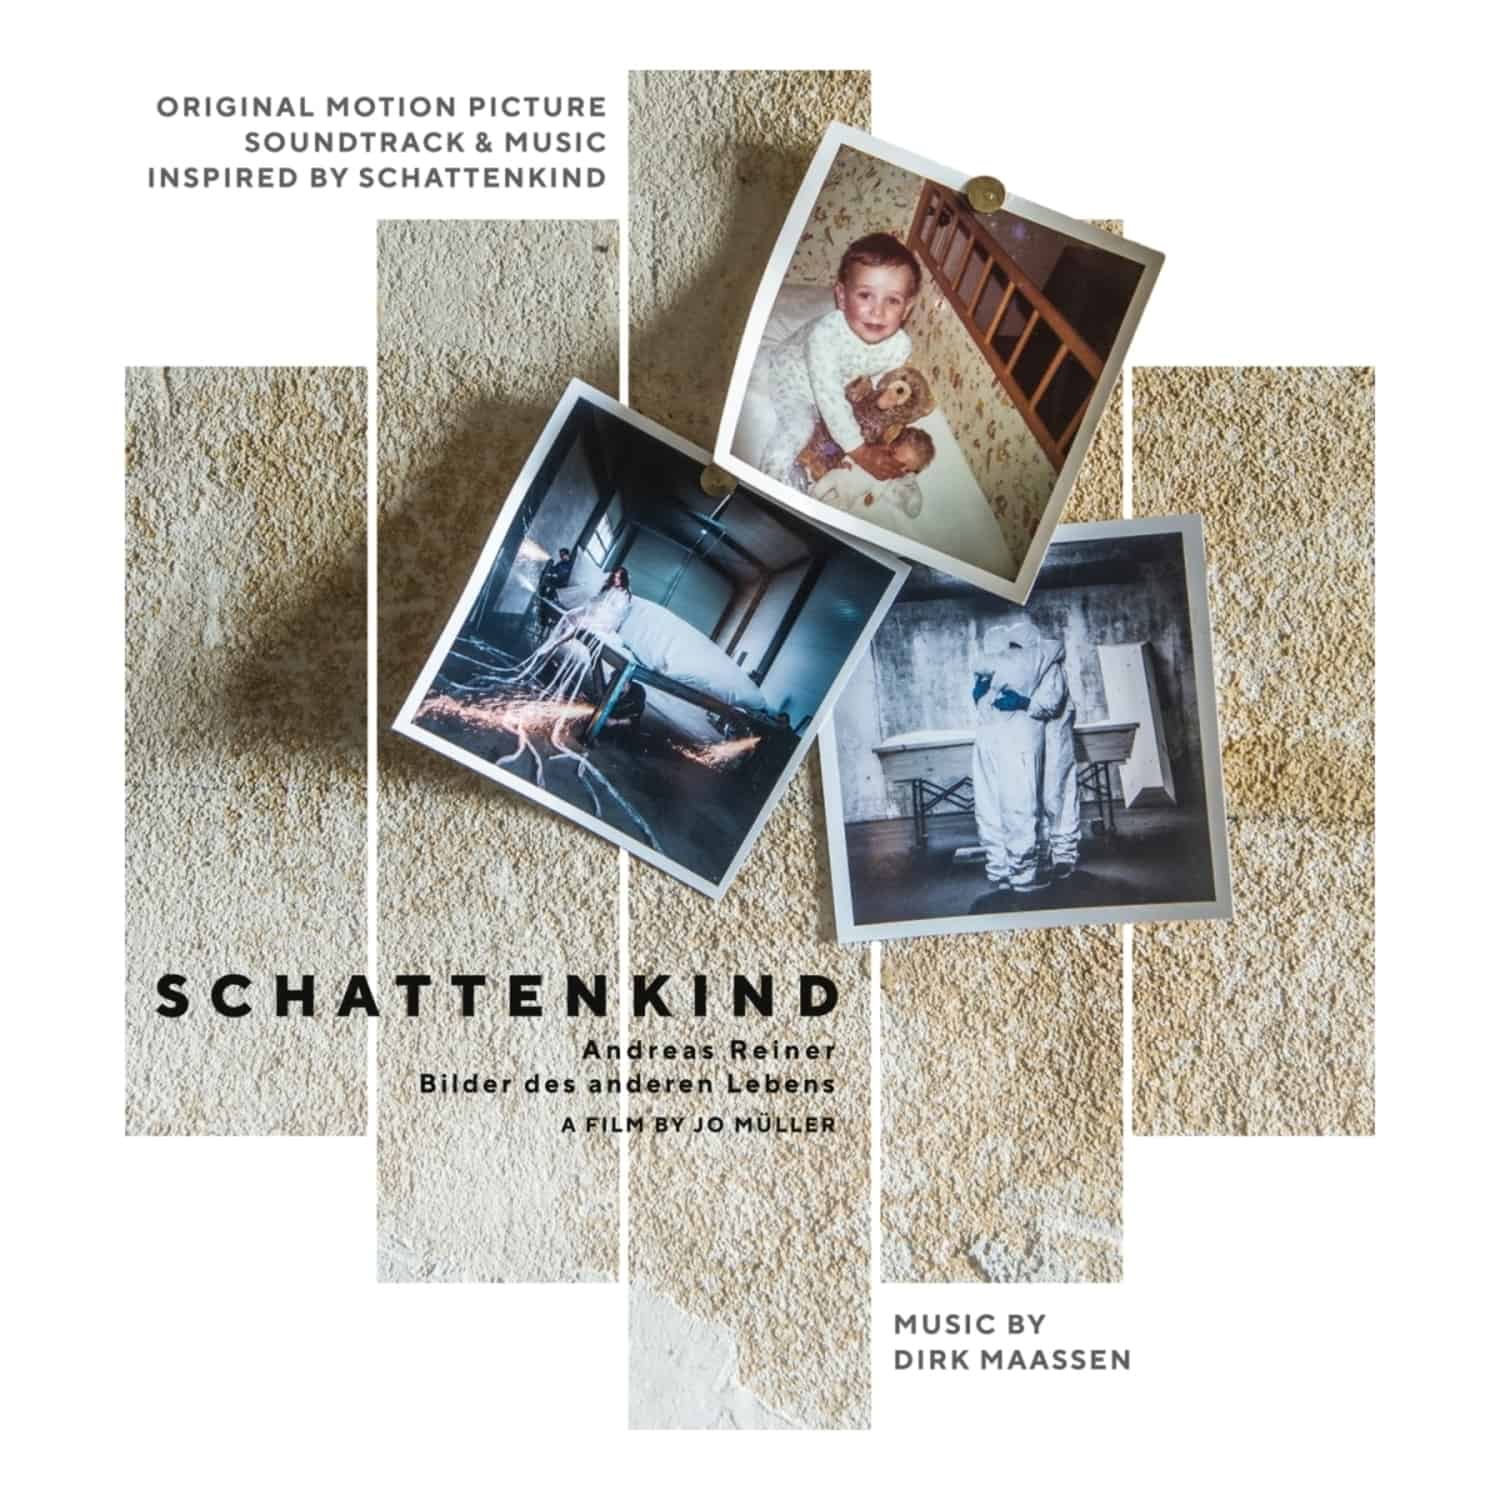 OST / Dirk Maassen - AND MUSIC INSPIRED BY - SCHATTENKIND - 